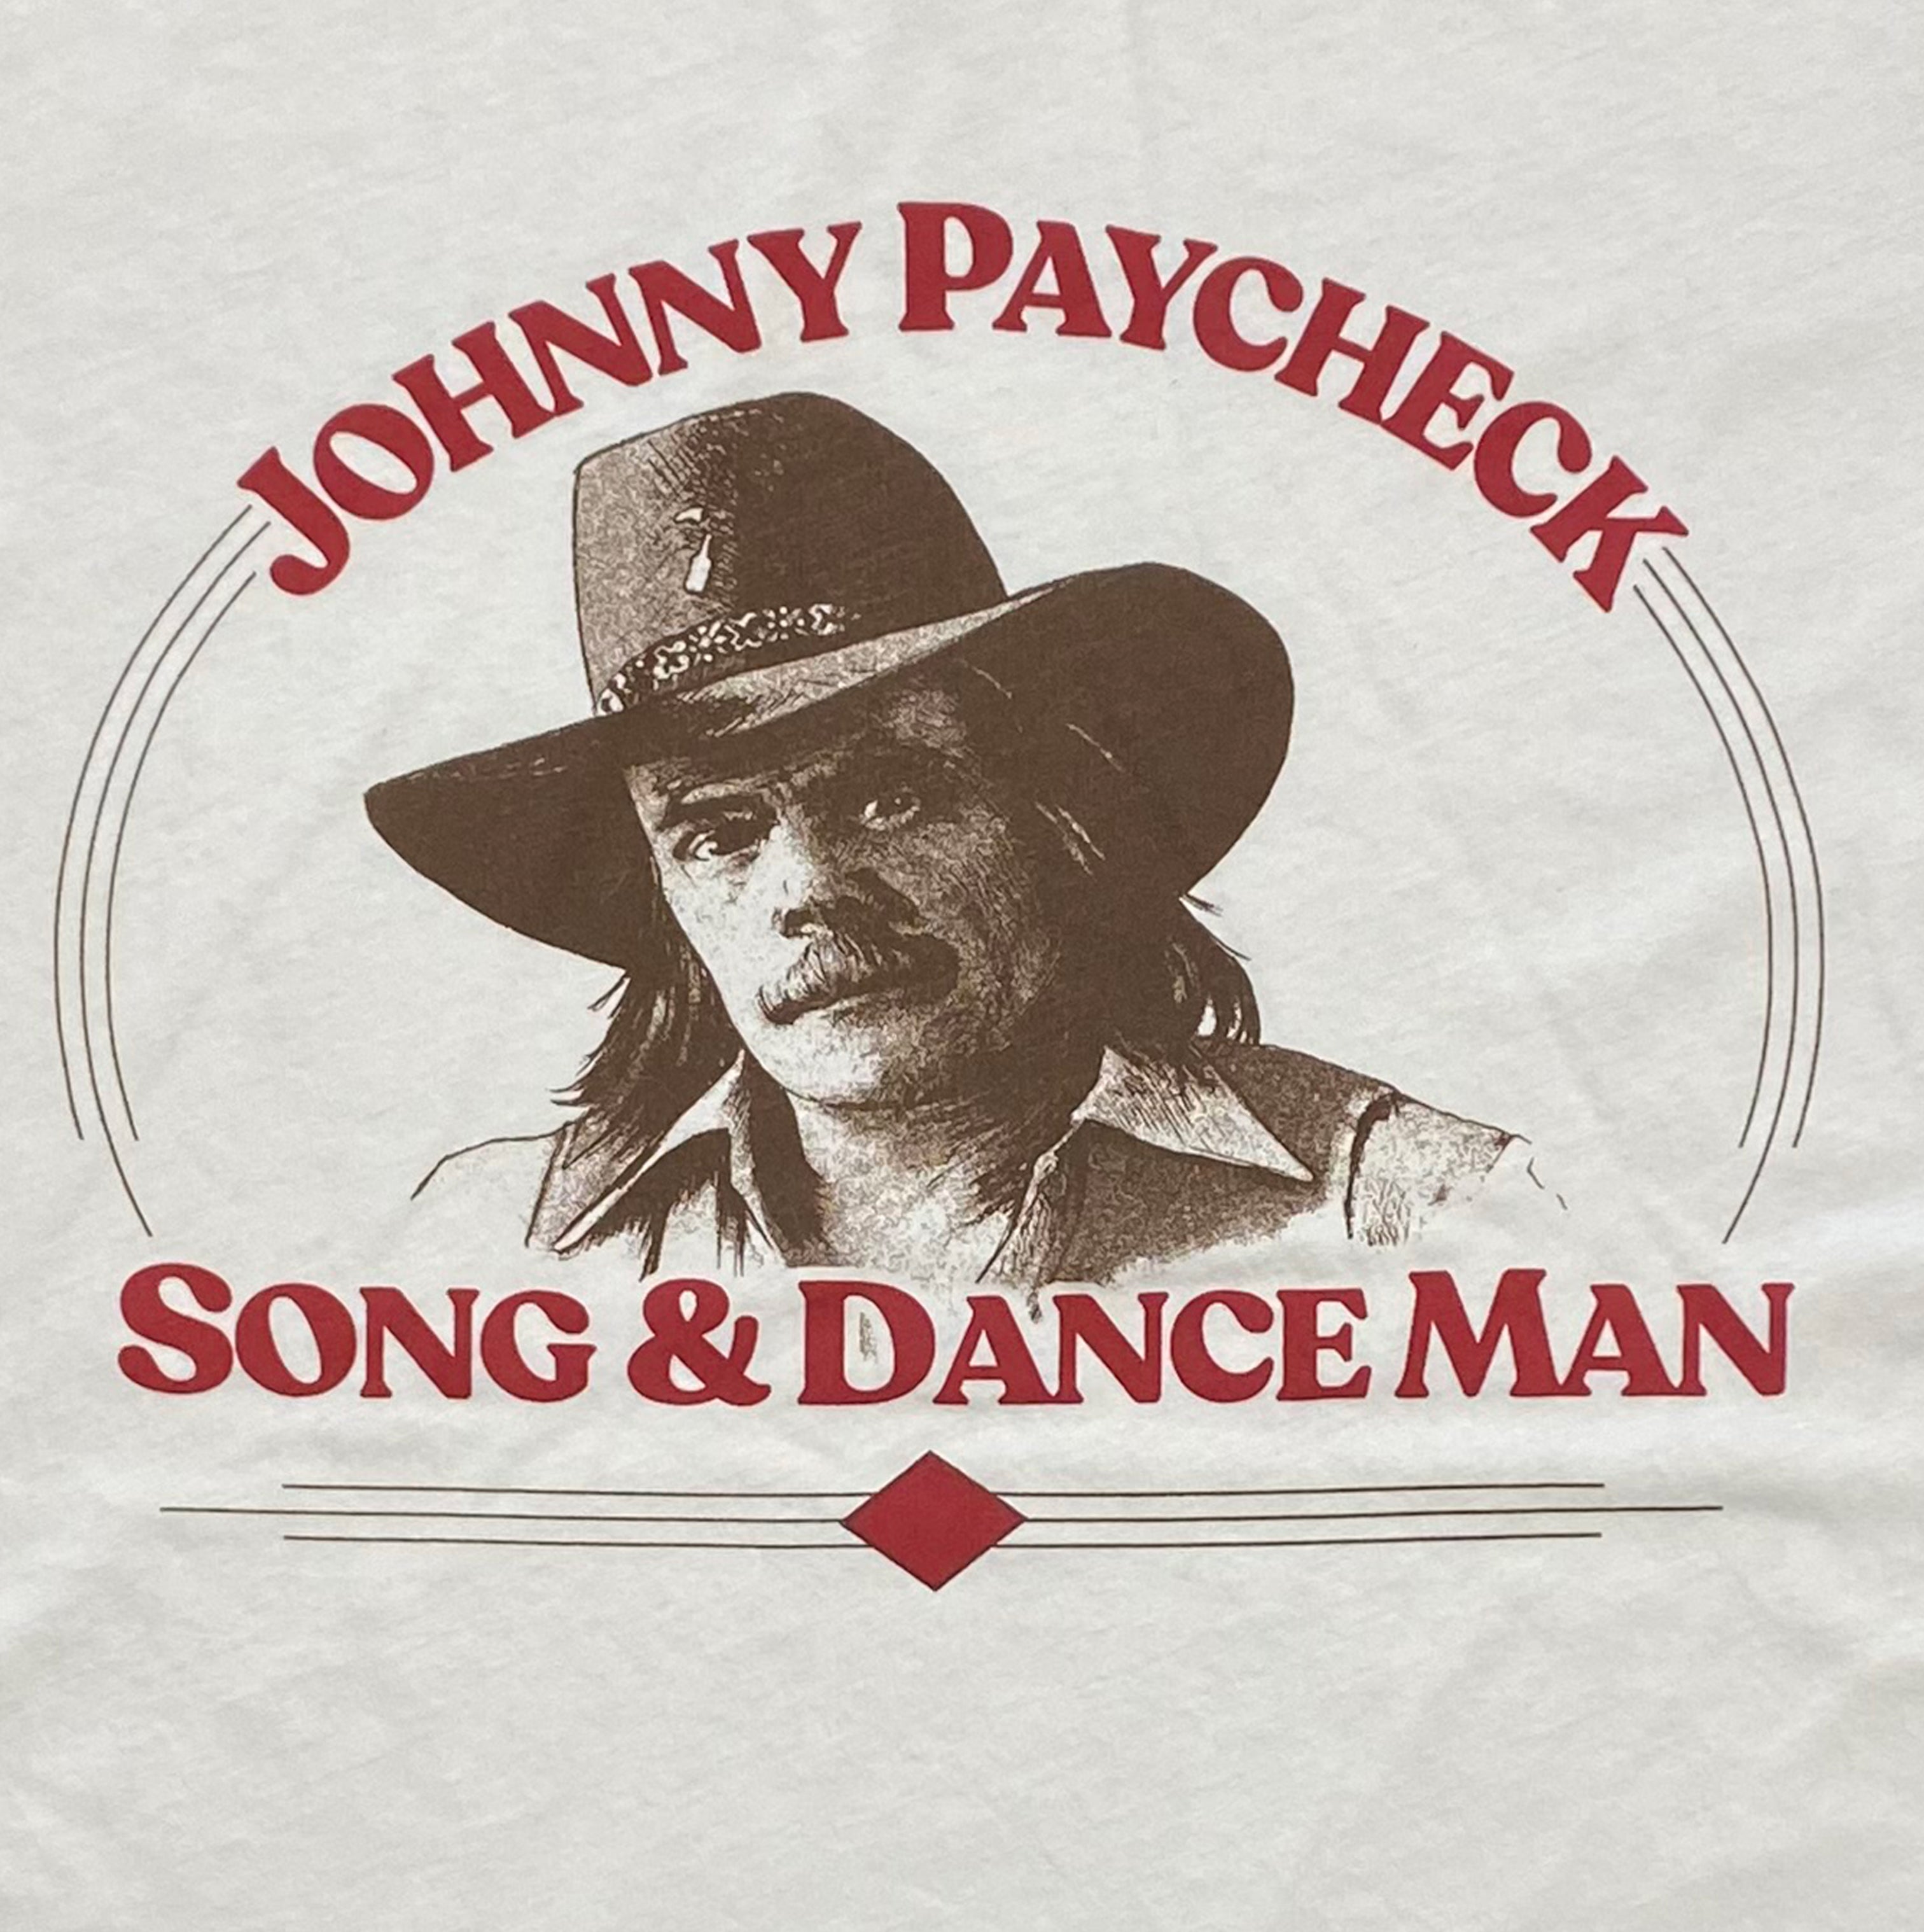 Johnny Paycheck Song & Dance Man Unisex Tee